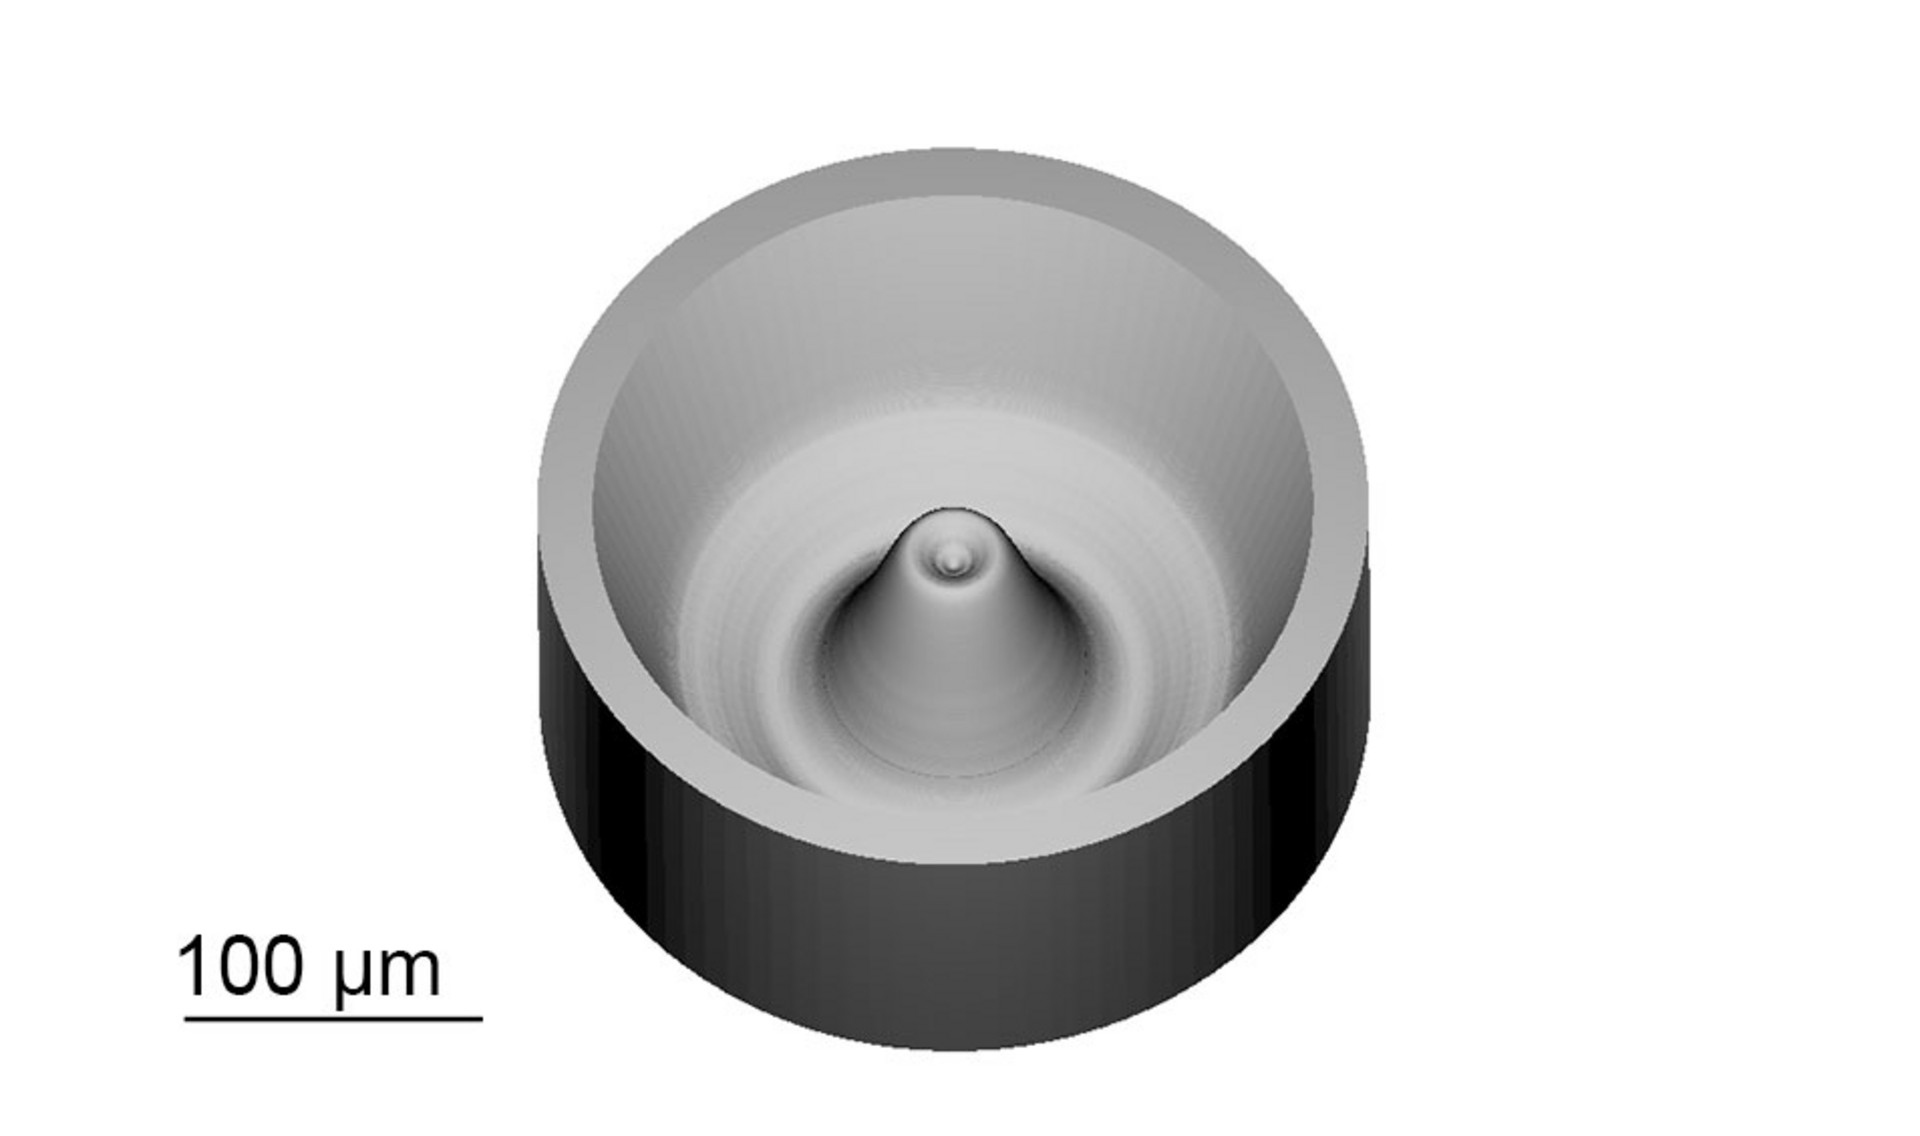 3D model of the phase plate